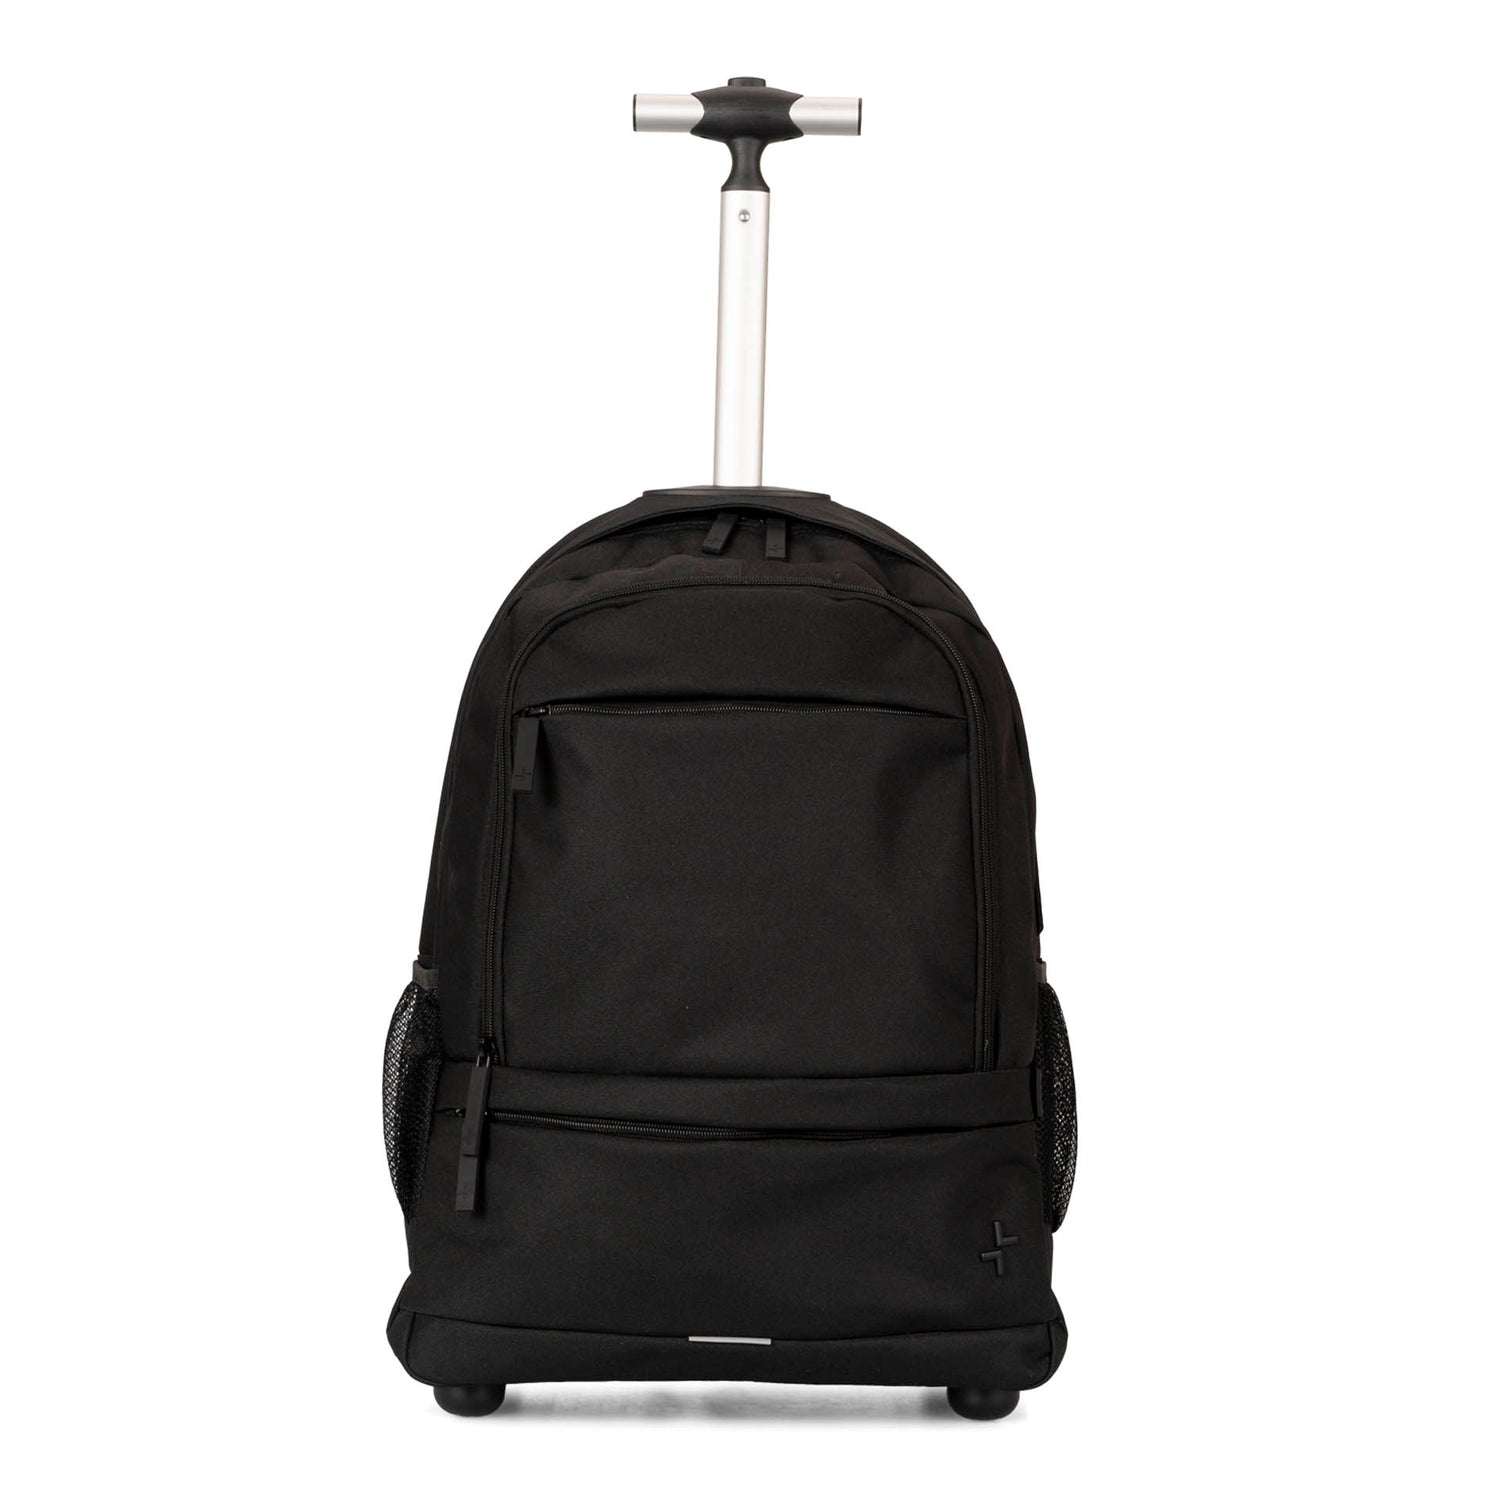 Front side of a black backpack on wheels called Mercier 3.0 designed by Tracker showing its telescopic handle 2 front zipper pockets, and 2 side mesh pockets.